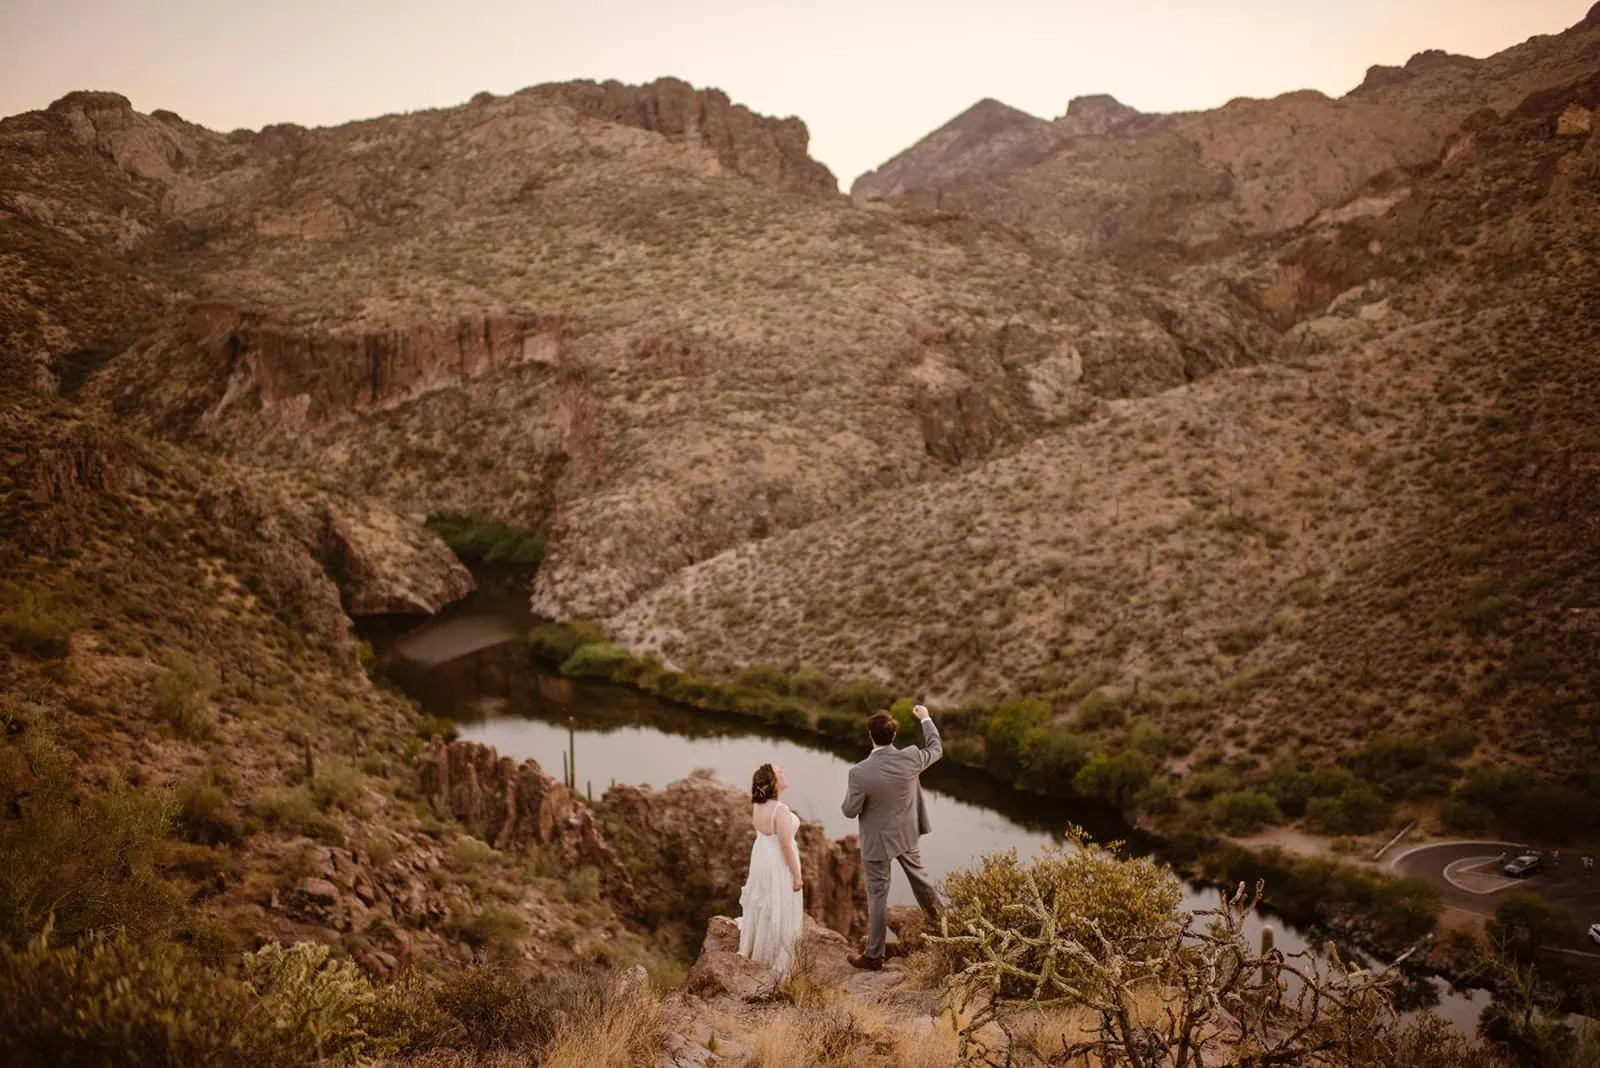 A groom celebrates his marriage on the edge of a cliff in Phoenix's Superstition Mountains at dusk.